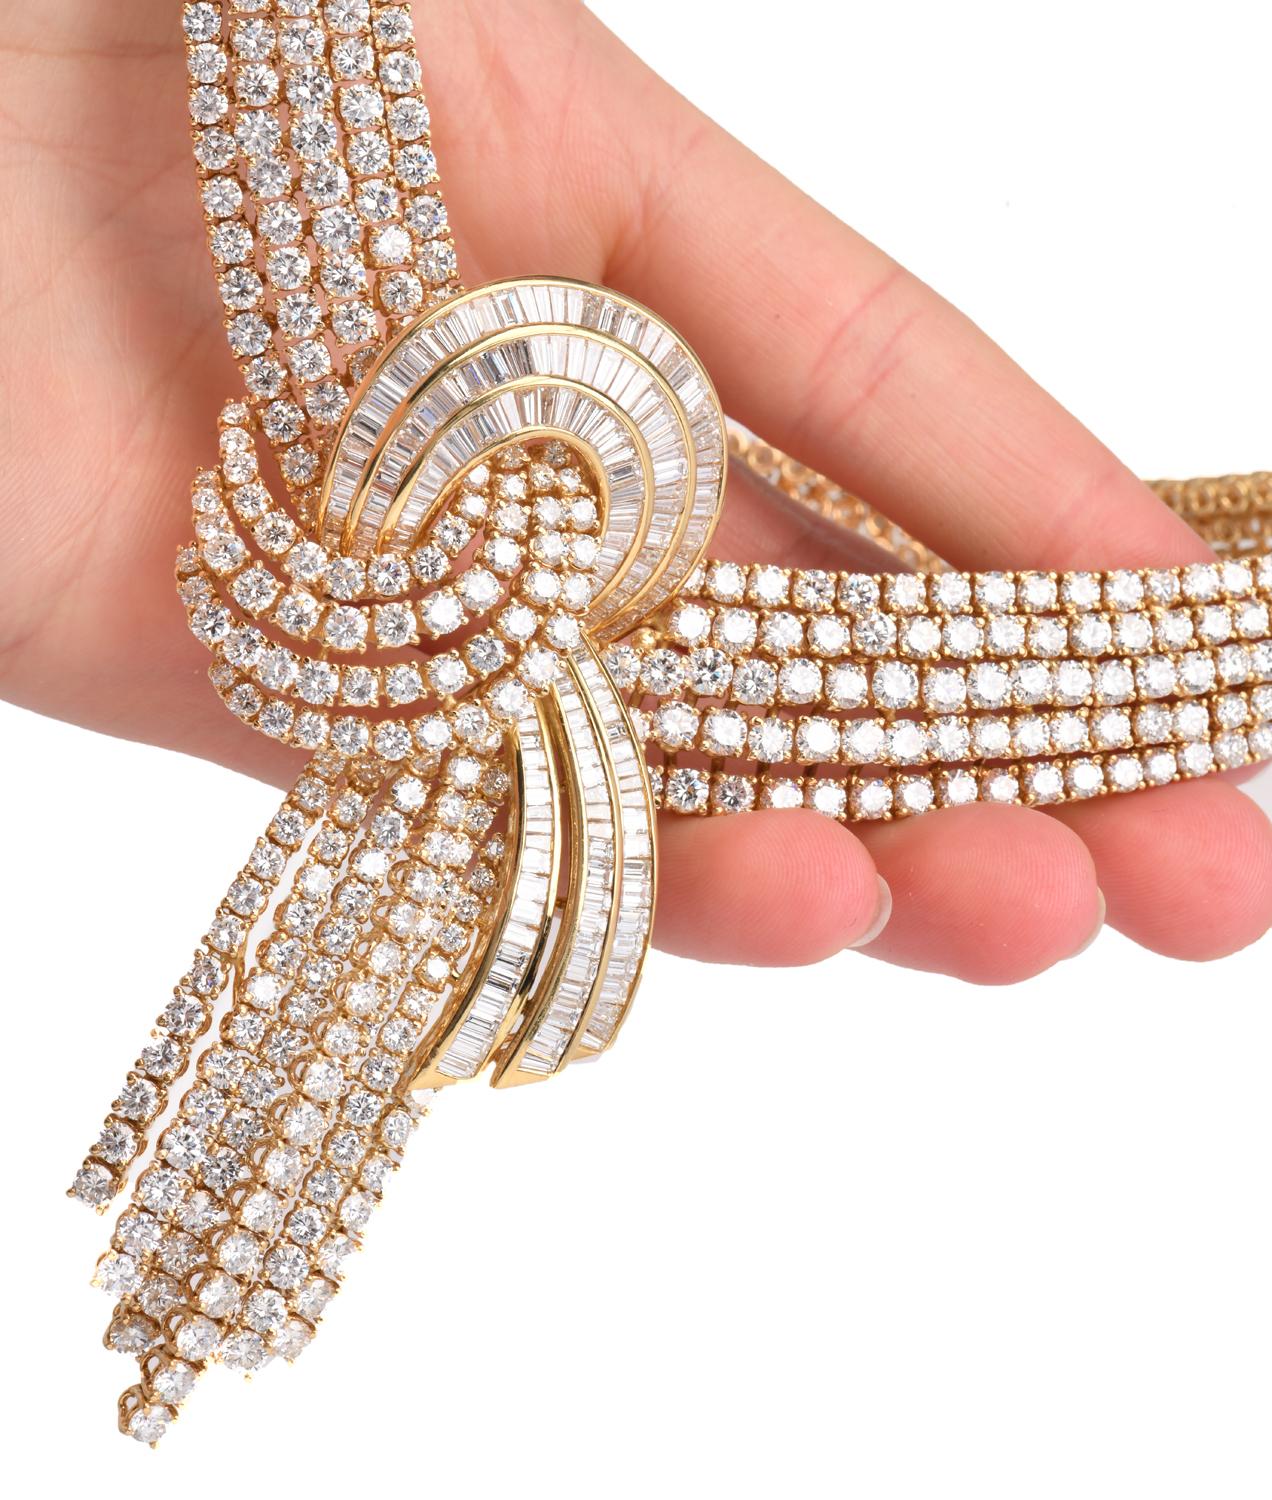 Stunning CAPRI Scarf Knot Design Statement Necklace made in solid 18K Yellow gold adorned with Prong set natural diamonds.
There are over 837 natural diamonds in Round and Baguette cuts. The total estimated carat weight is 122.58 carats total. The